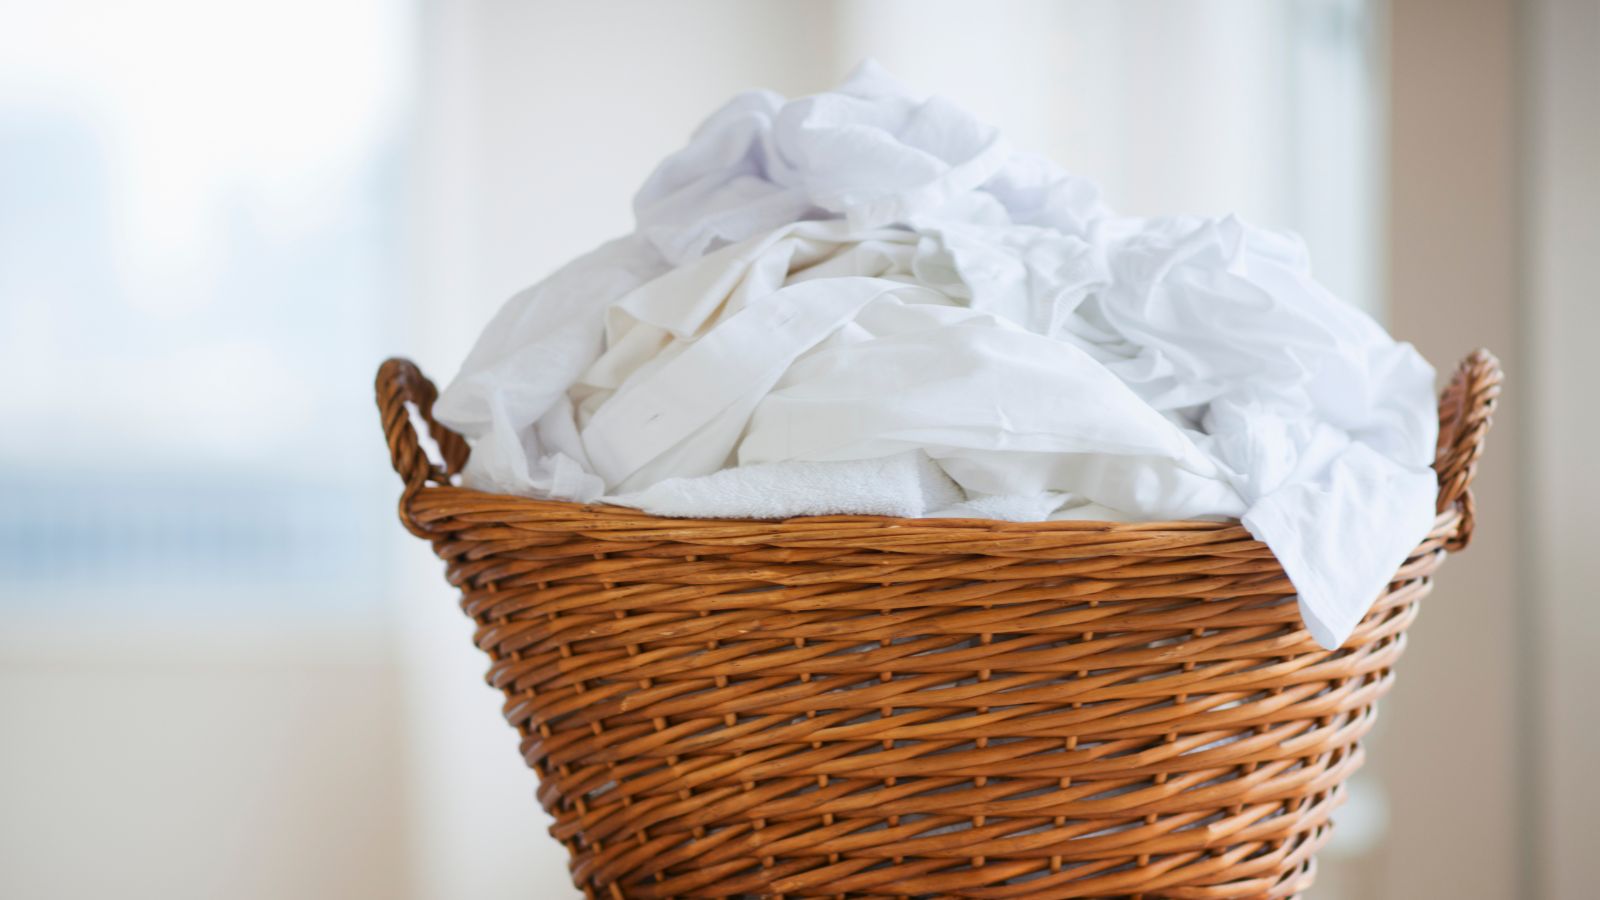 Can I dry white clothes with colors? Expert advice for avoiding